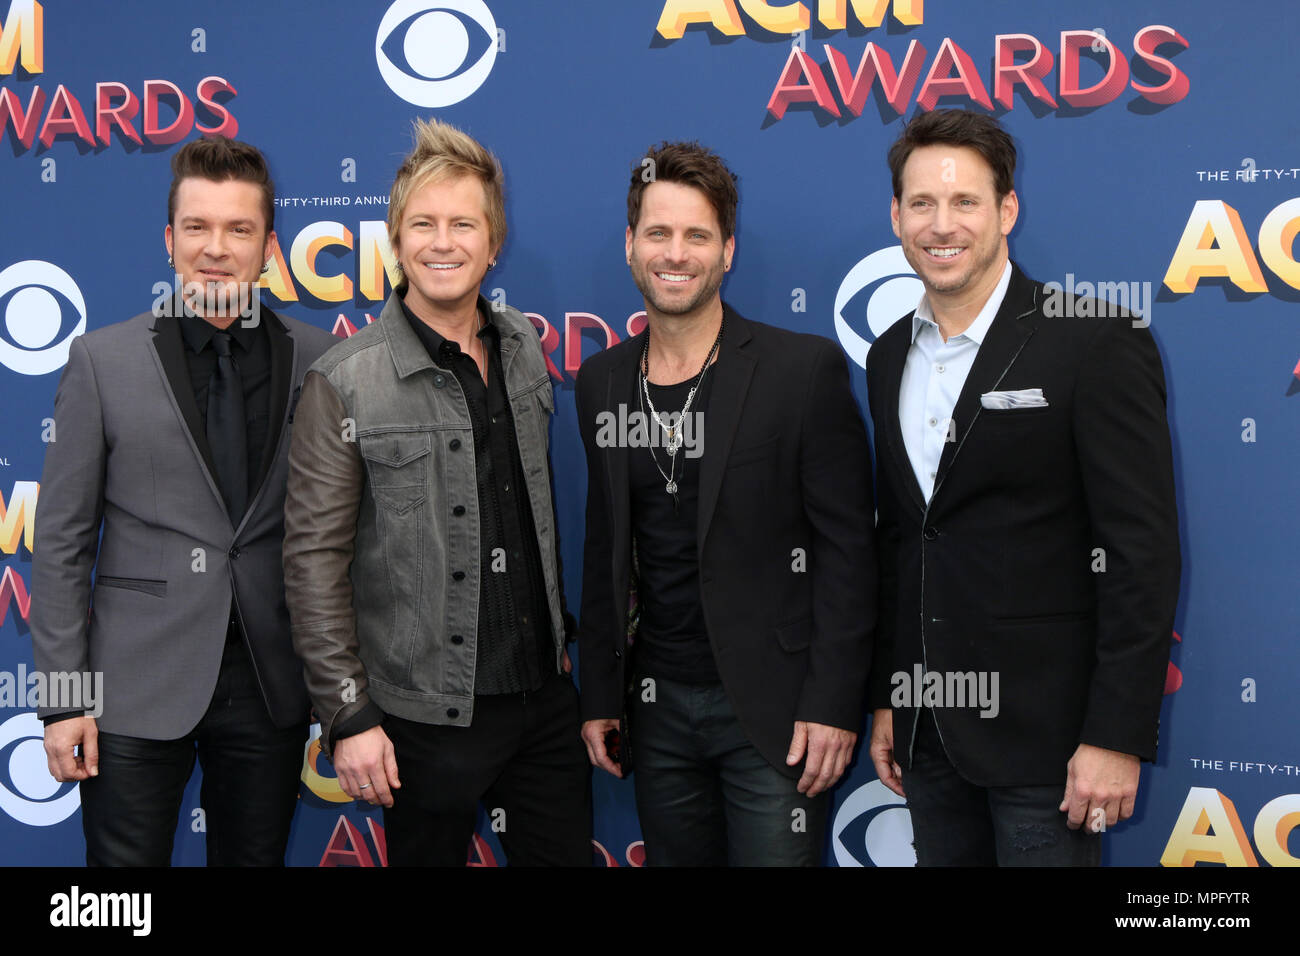 53rd Annual Academy Of Country Music Awards 2018, held at MGM Grand Garden Arena inside the MGM Grand Hotel & Casino in Las Vegas, Nevada.  Featuring: Barry Knox, Josh McSwain, Matt Thomas, Scott Thomas, Parmalee Where: Las Vegas, Nevada, United States When: 15 Apr 2018 Credit: Nicky Nelson/WENN.com Stock Photo